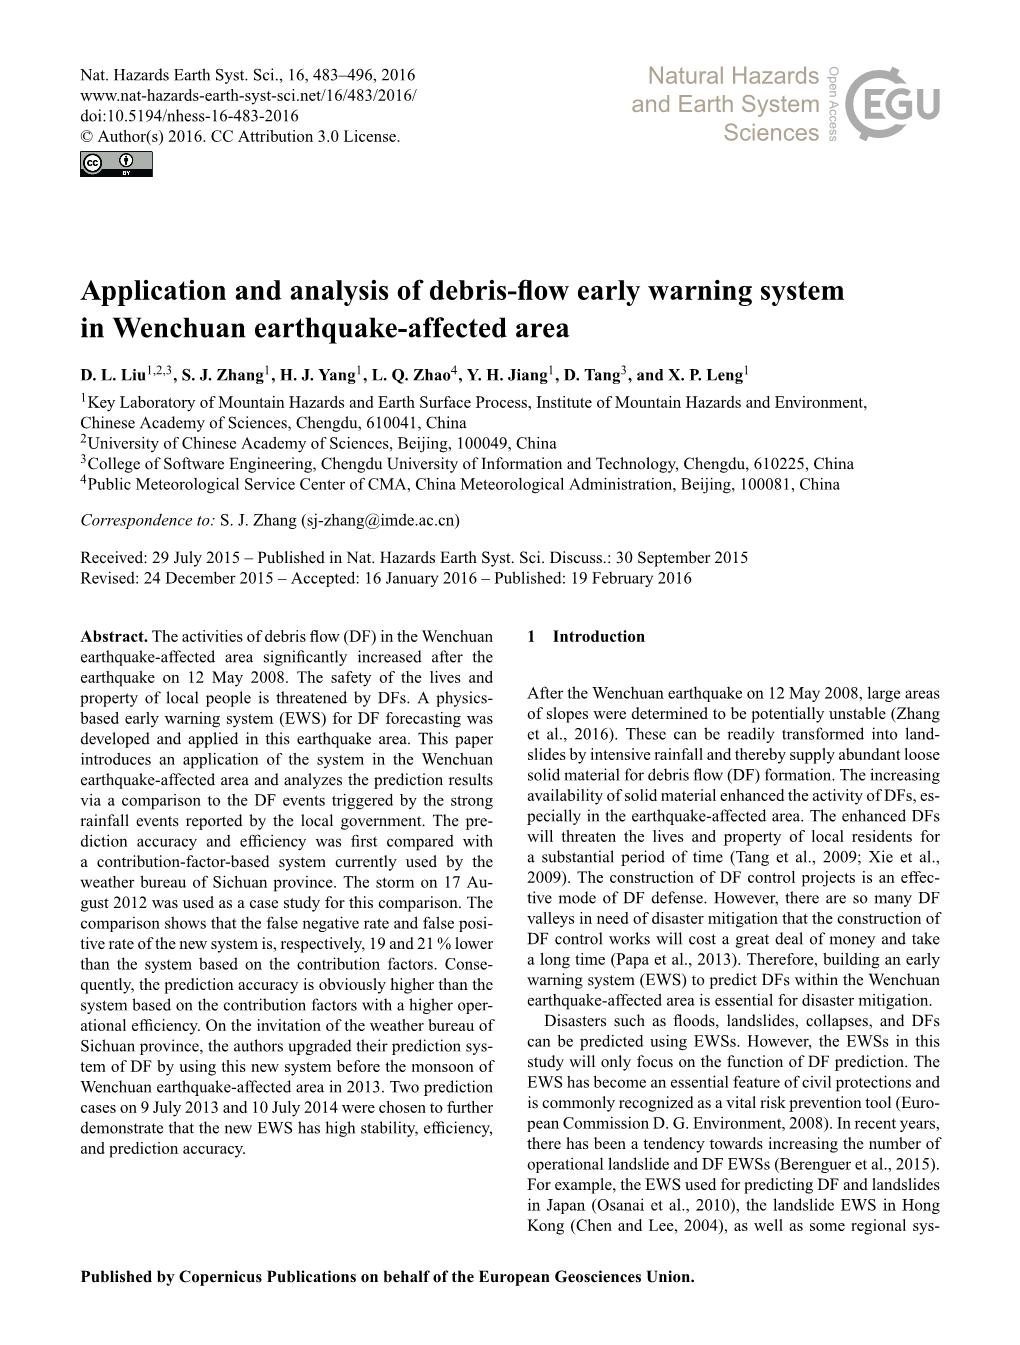 Application and Analysis of Debris-Flow Early Warning System In